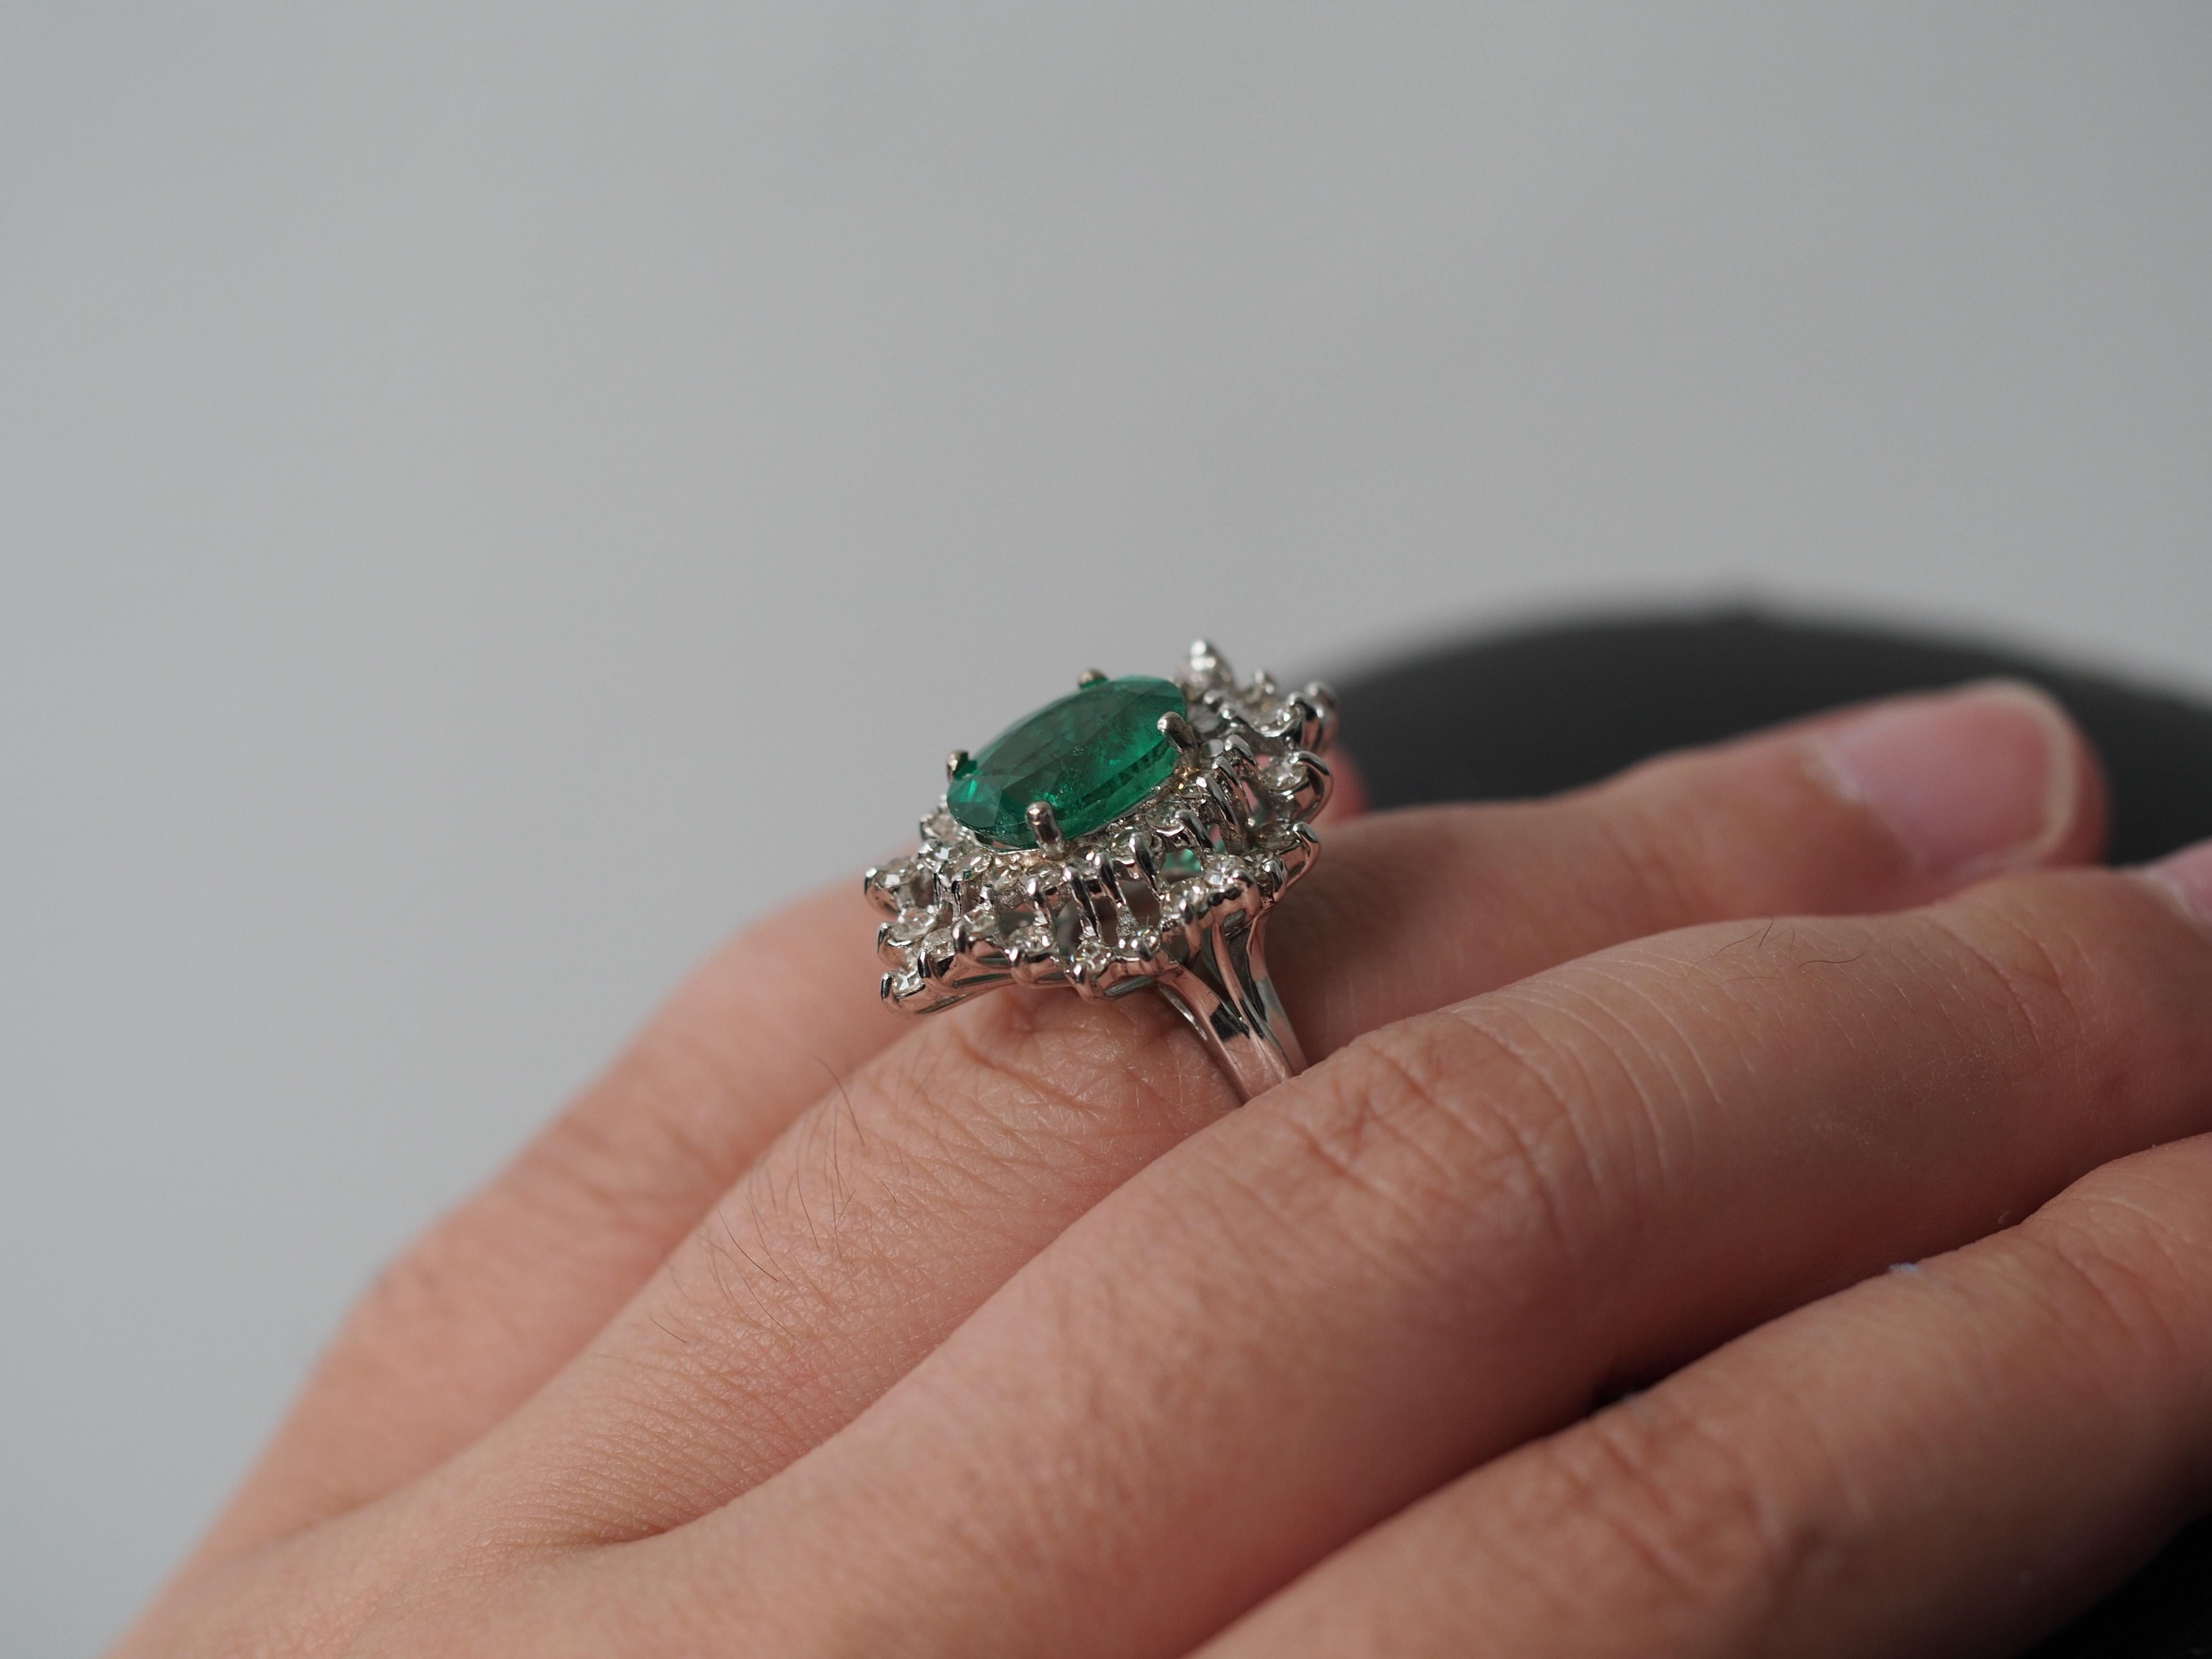 Item Details:
Ring Size:
Metal Type: 14K White Gold [Hallmarked, and Tested]
Weight: 7.5 grams

Center Stone: Natural Emerald with GIA Report.

GIA Report #5221950722

Type: Natural Emerald

Treatment: F1 Minor

Size: 3.00ct (Approximate)

Side